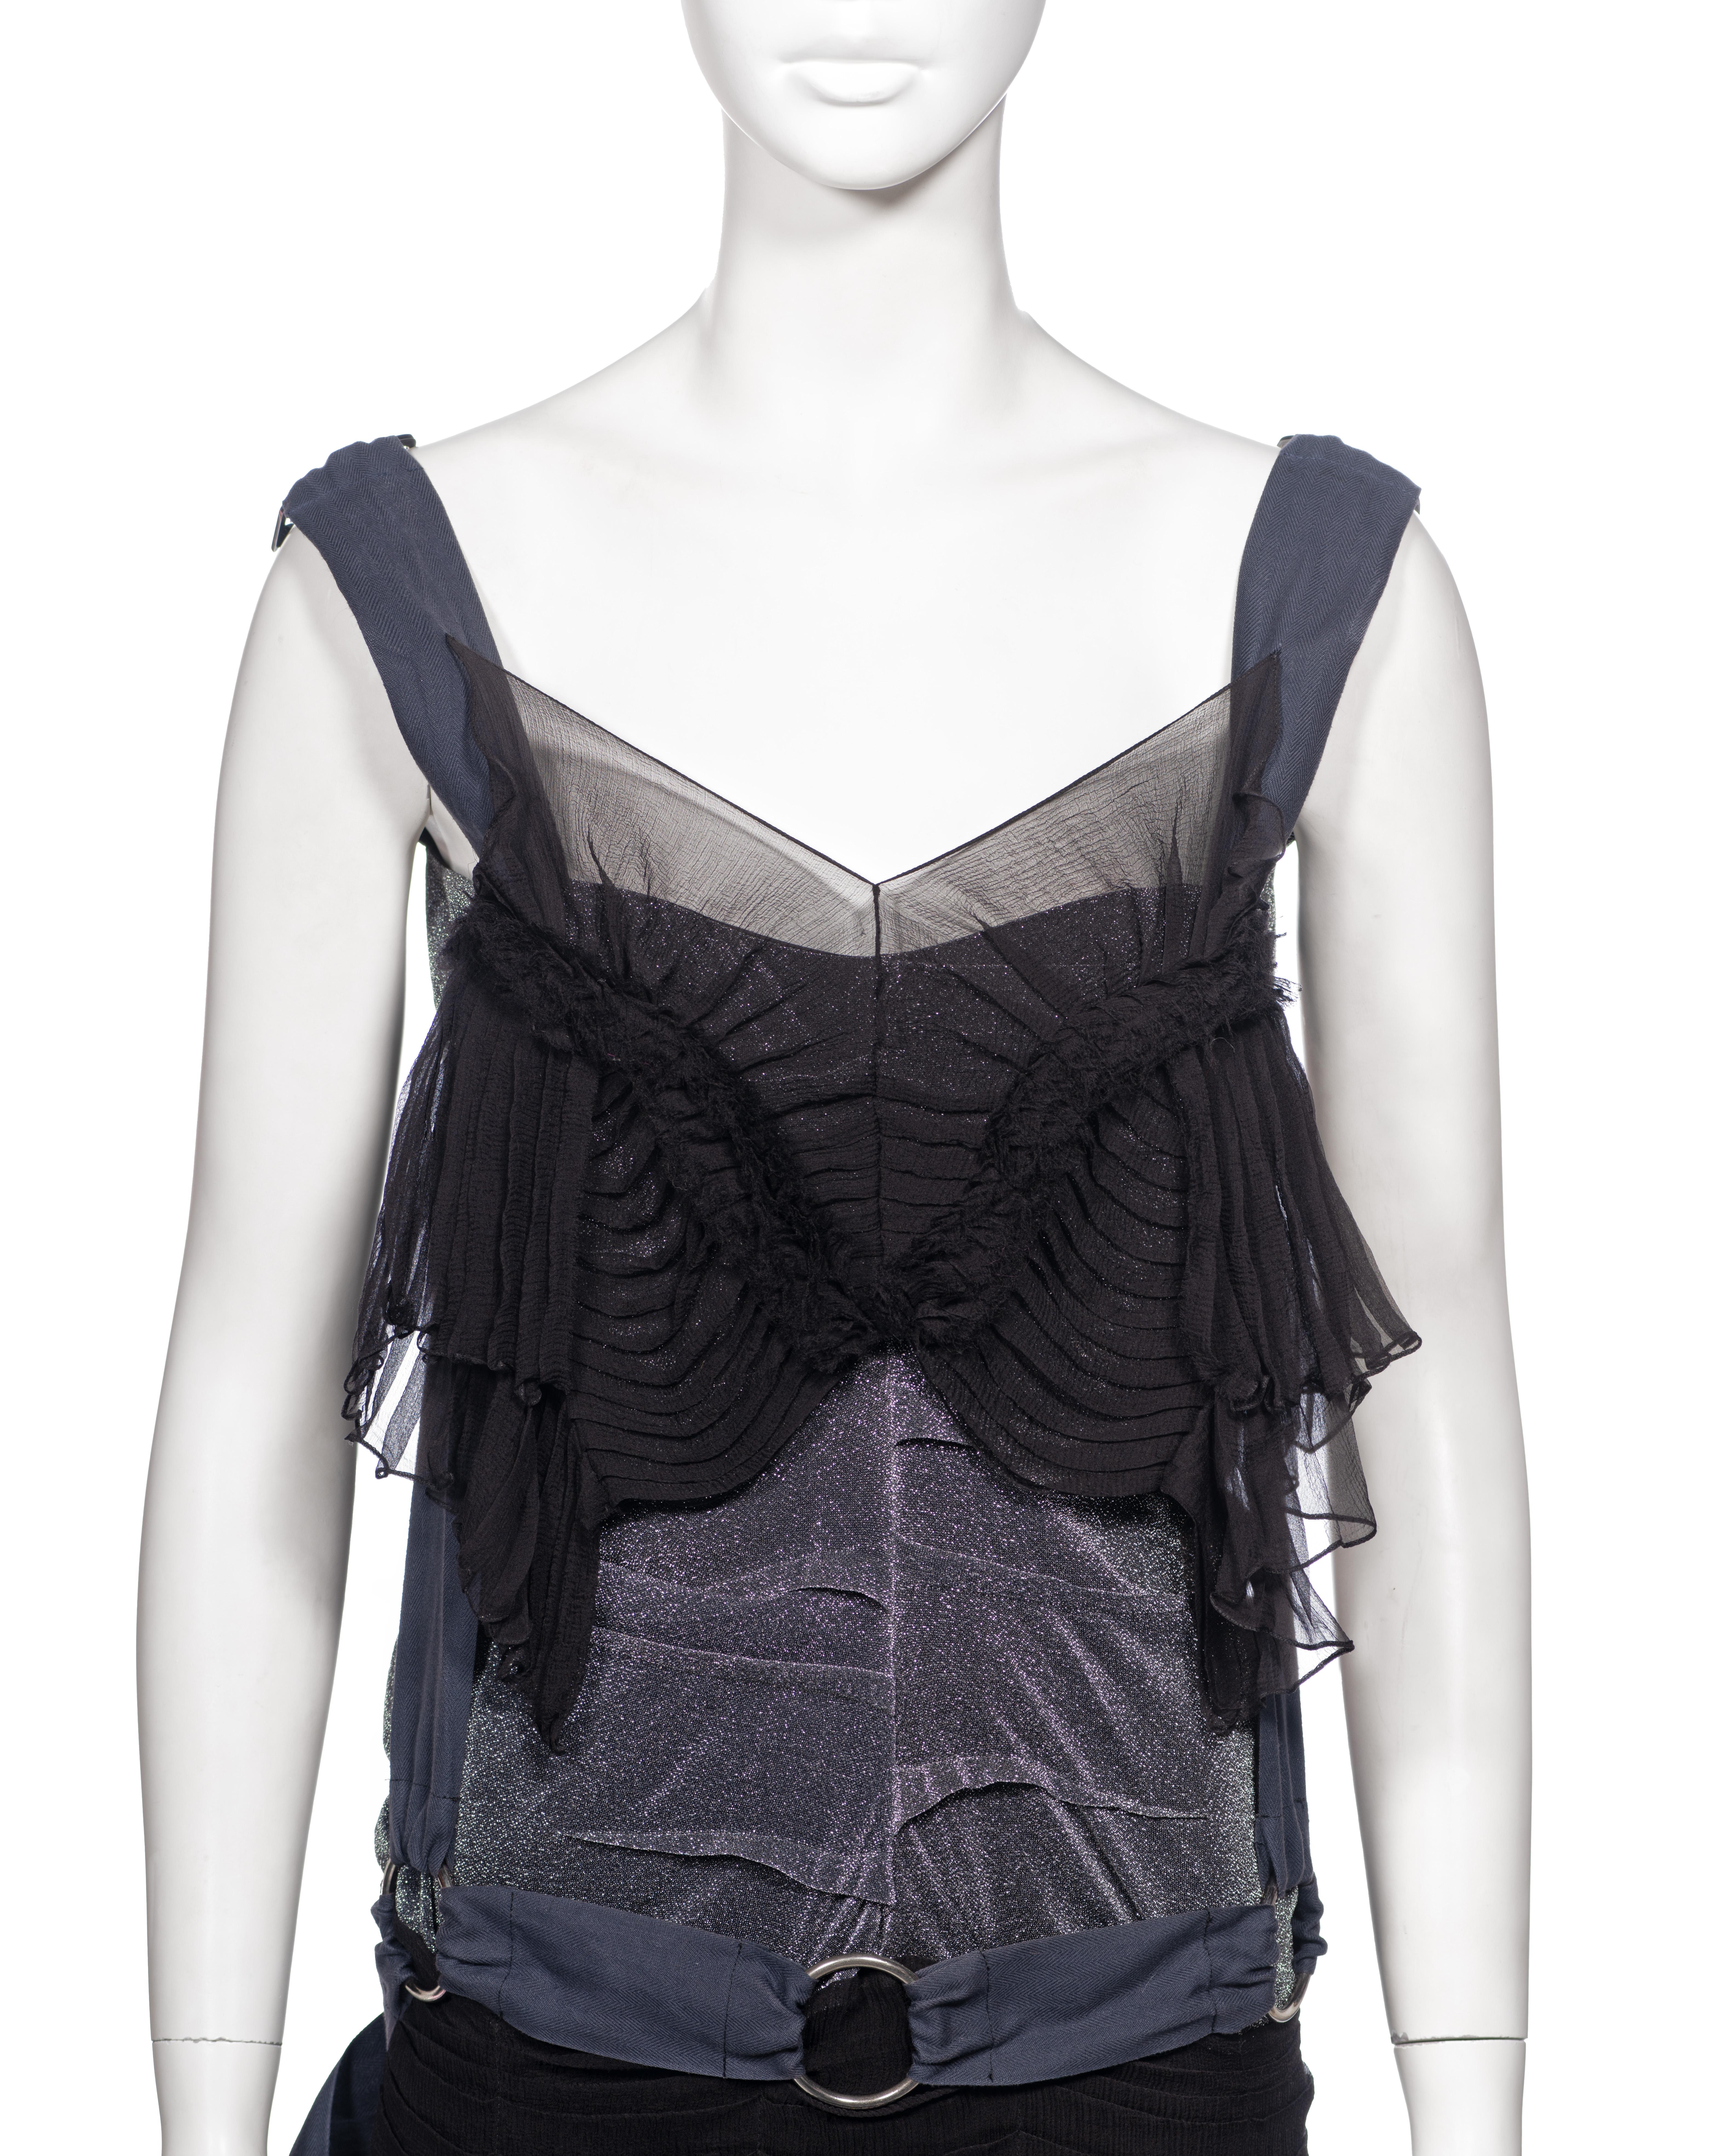 Christian Dior by John Galliano Silk Chiffon and Lurex Mini Dress, ss 2003 In Good Condition For Sale In London, GB